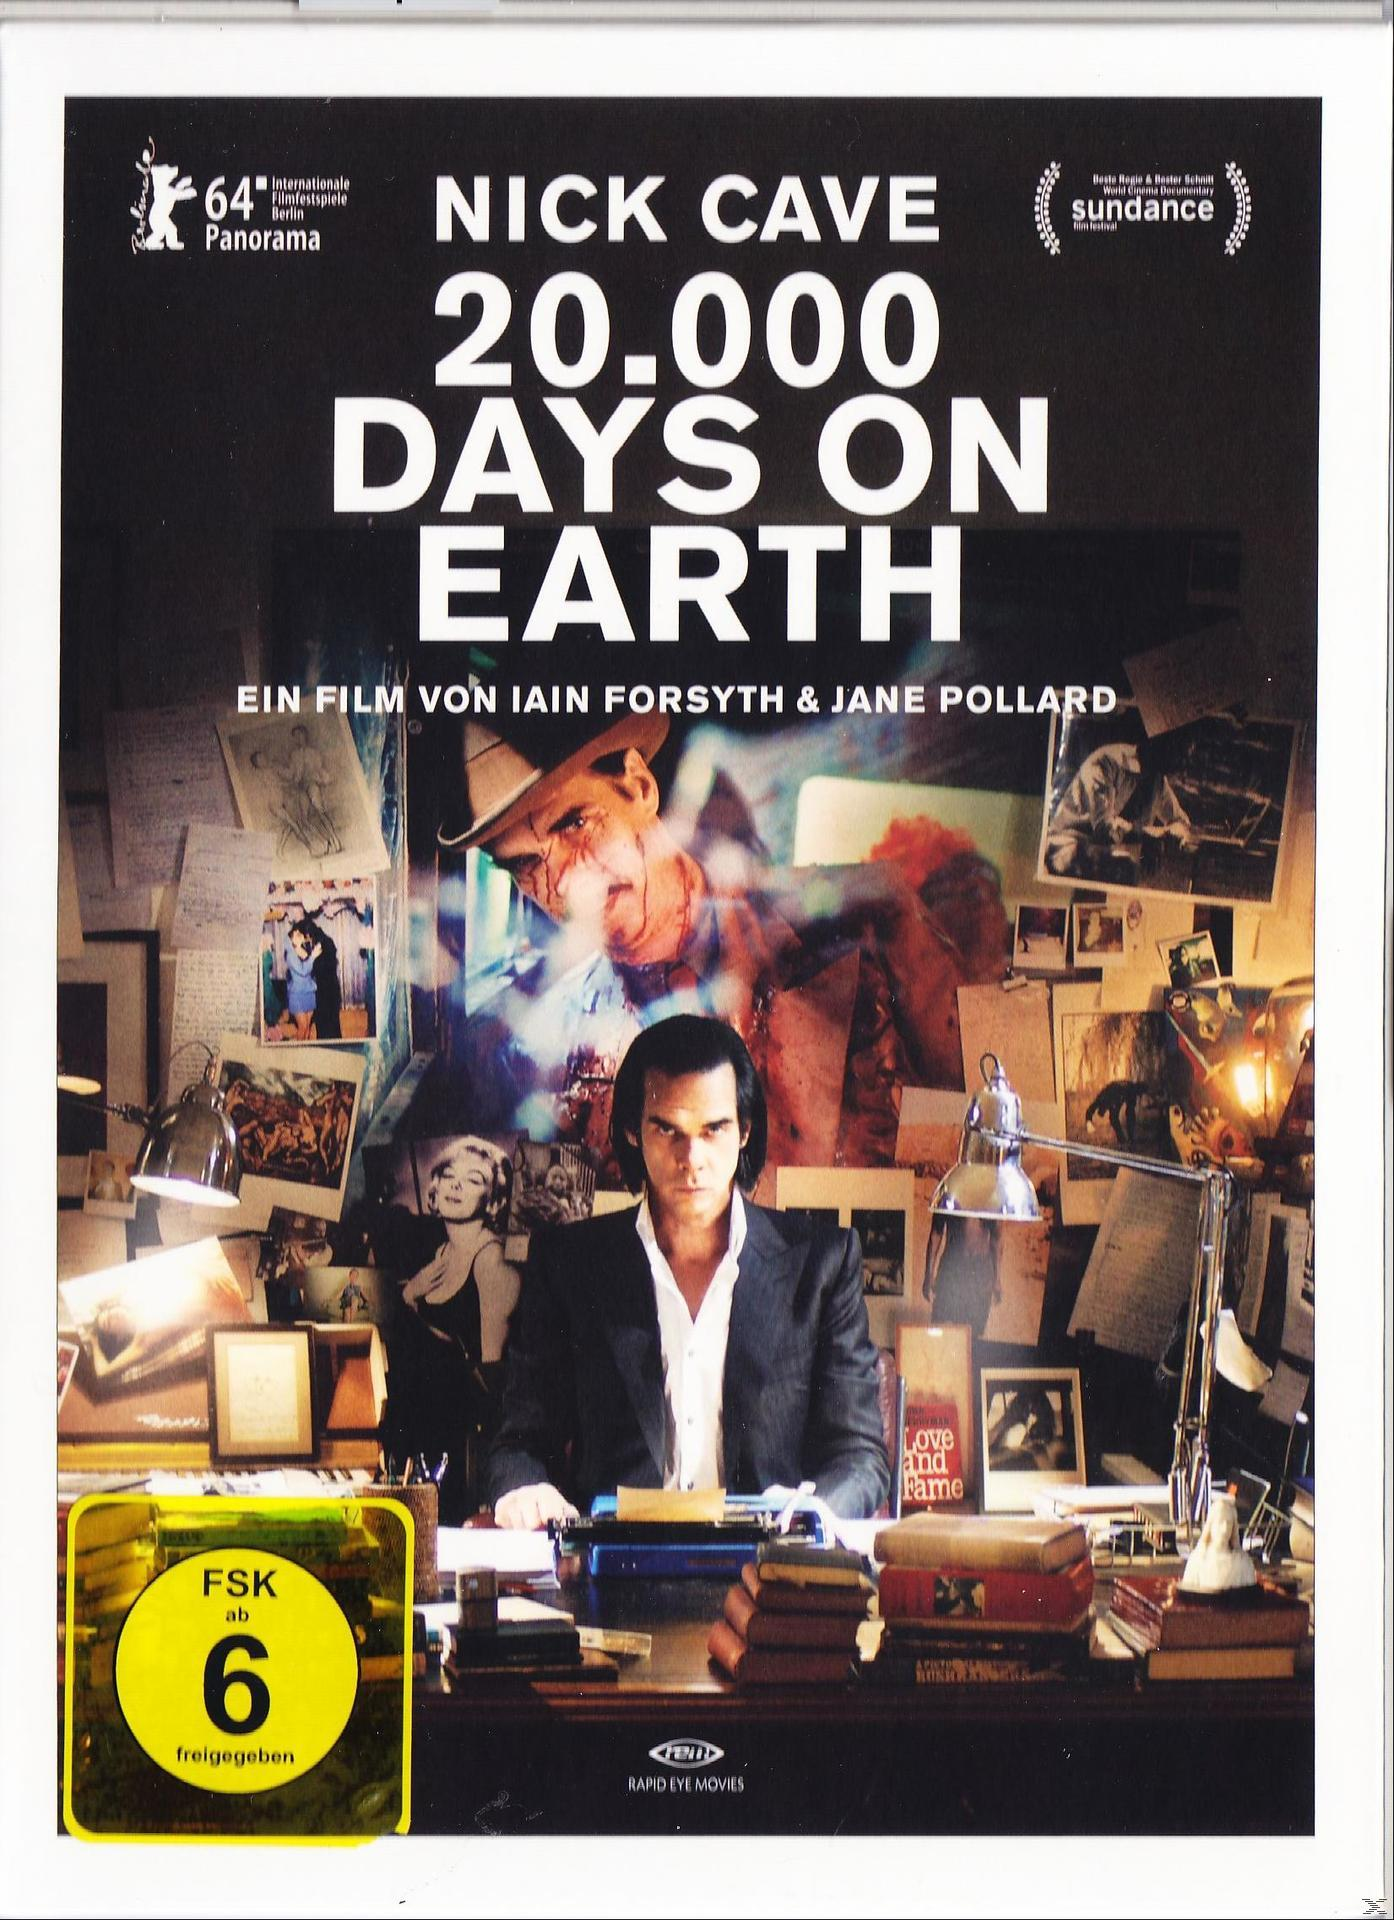 Nick Cave - 20.000 Days Earth on Blu-ray